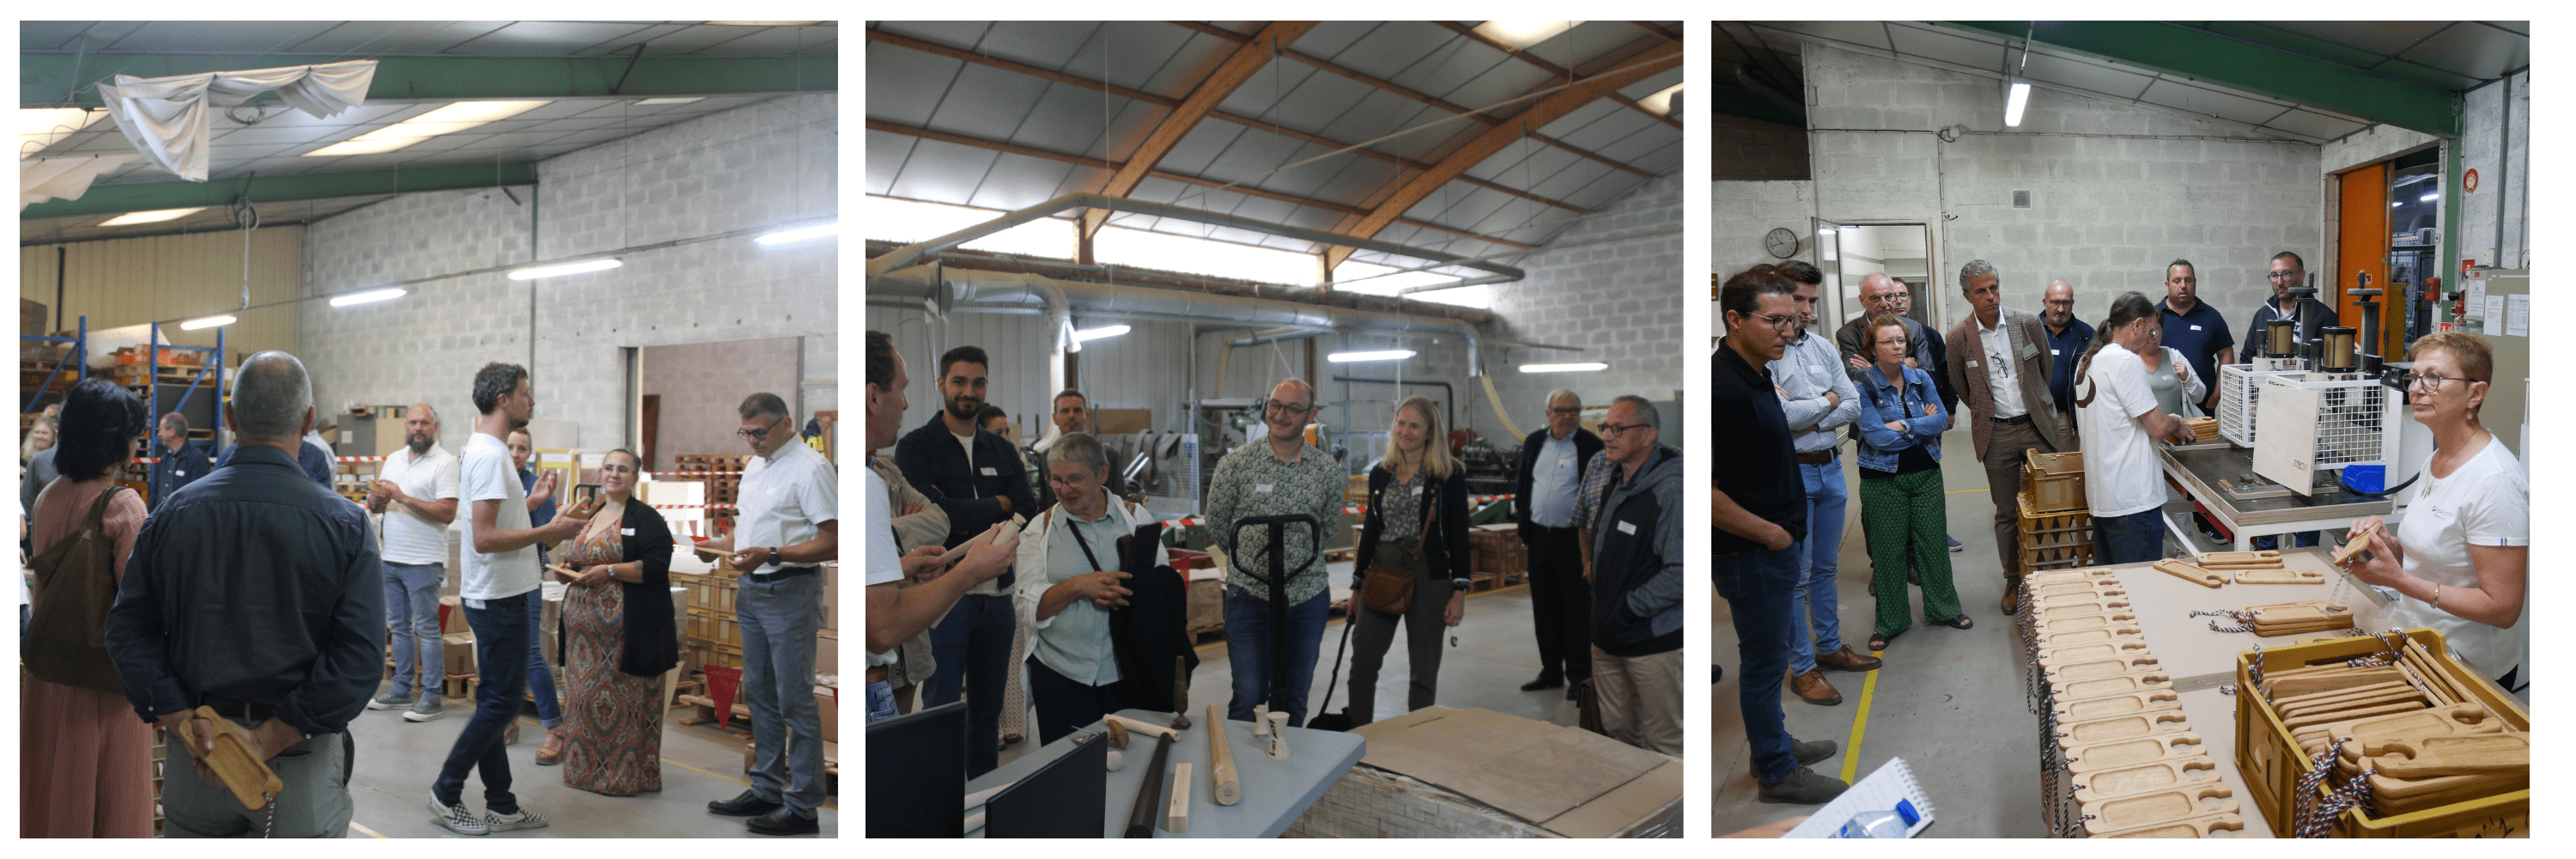 BAUDRY_50ANS_ATELIER_USINAGE_GROUPE1-min